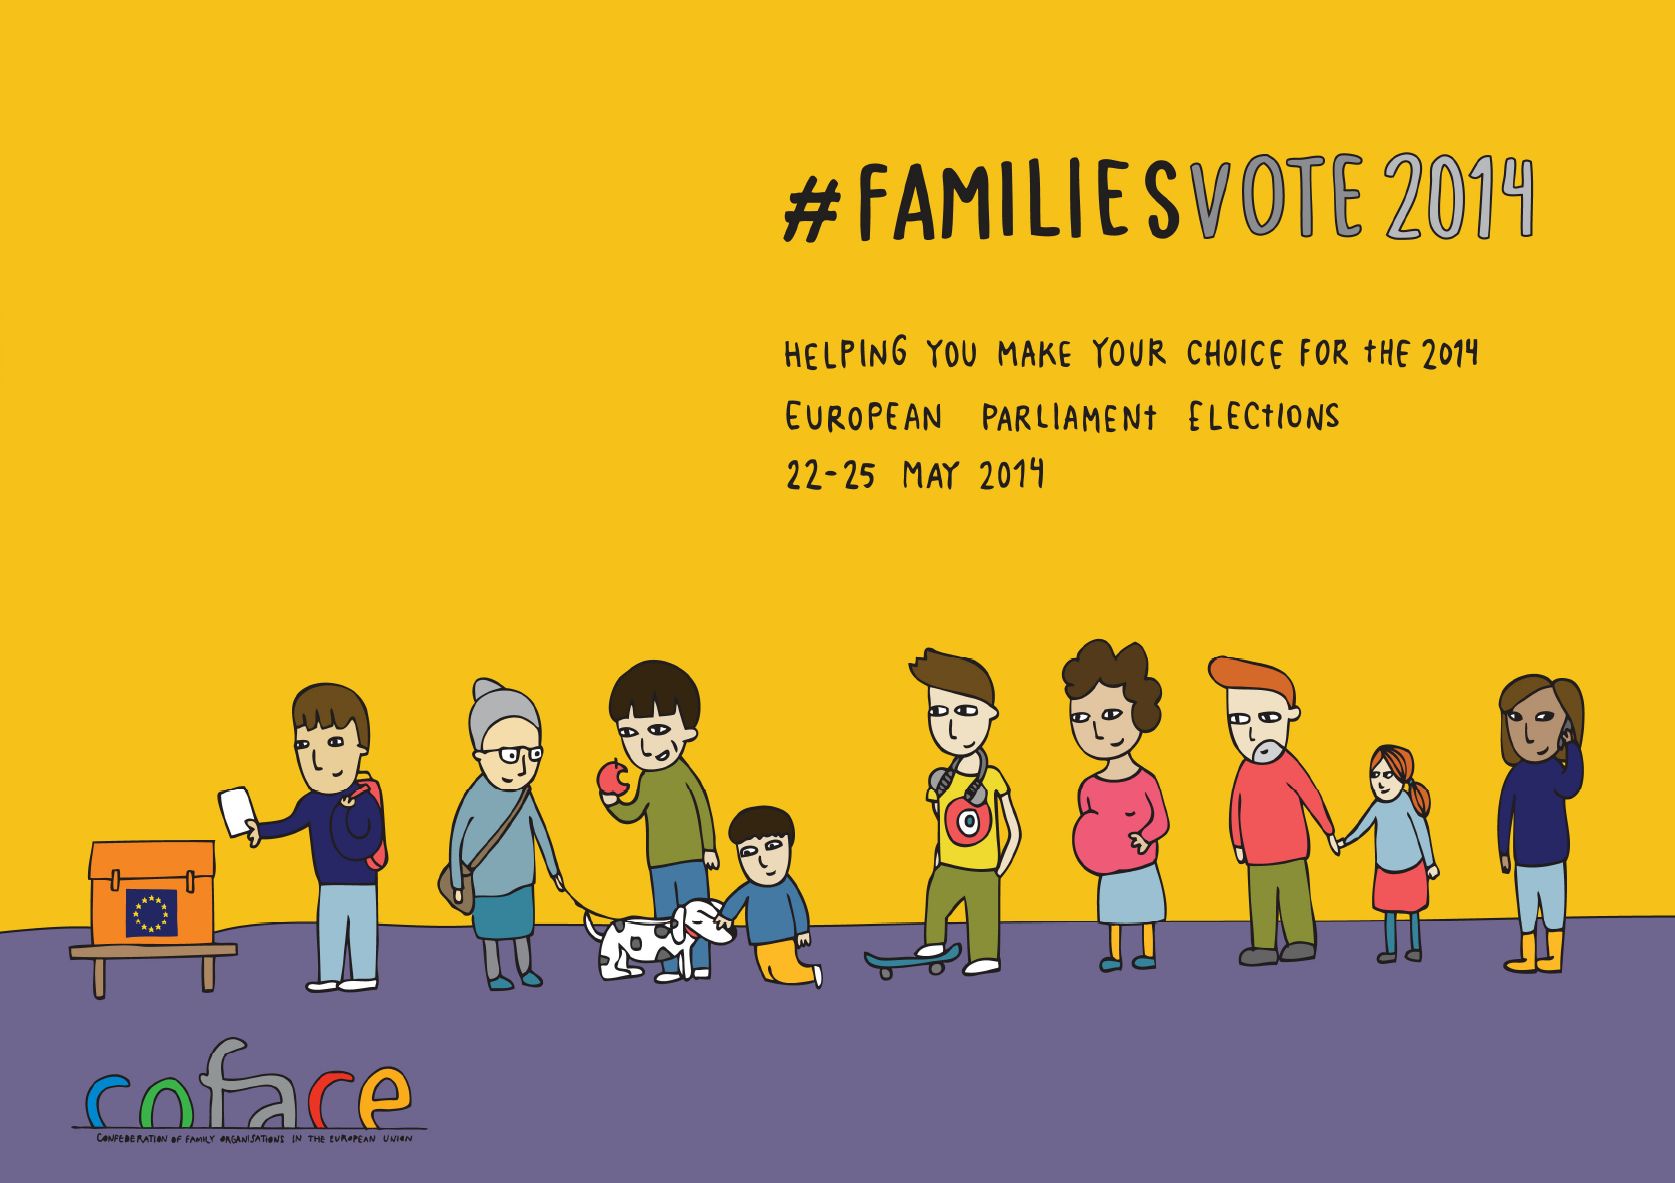 28.03.2014: #FamiliesVOTE2014 debate on 28 March